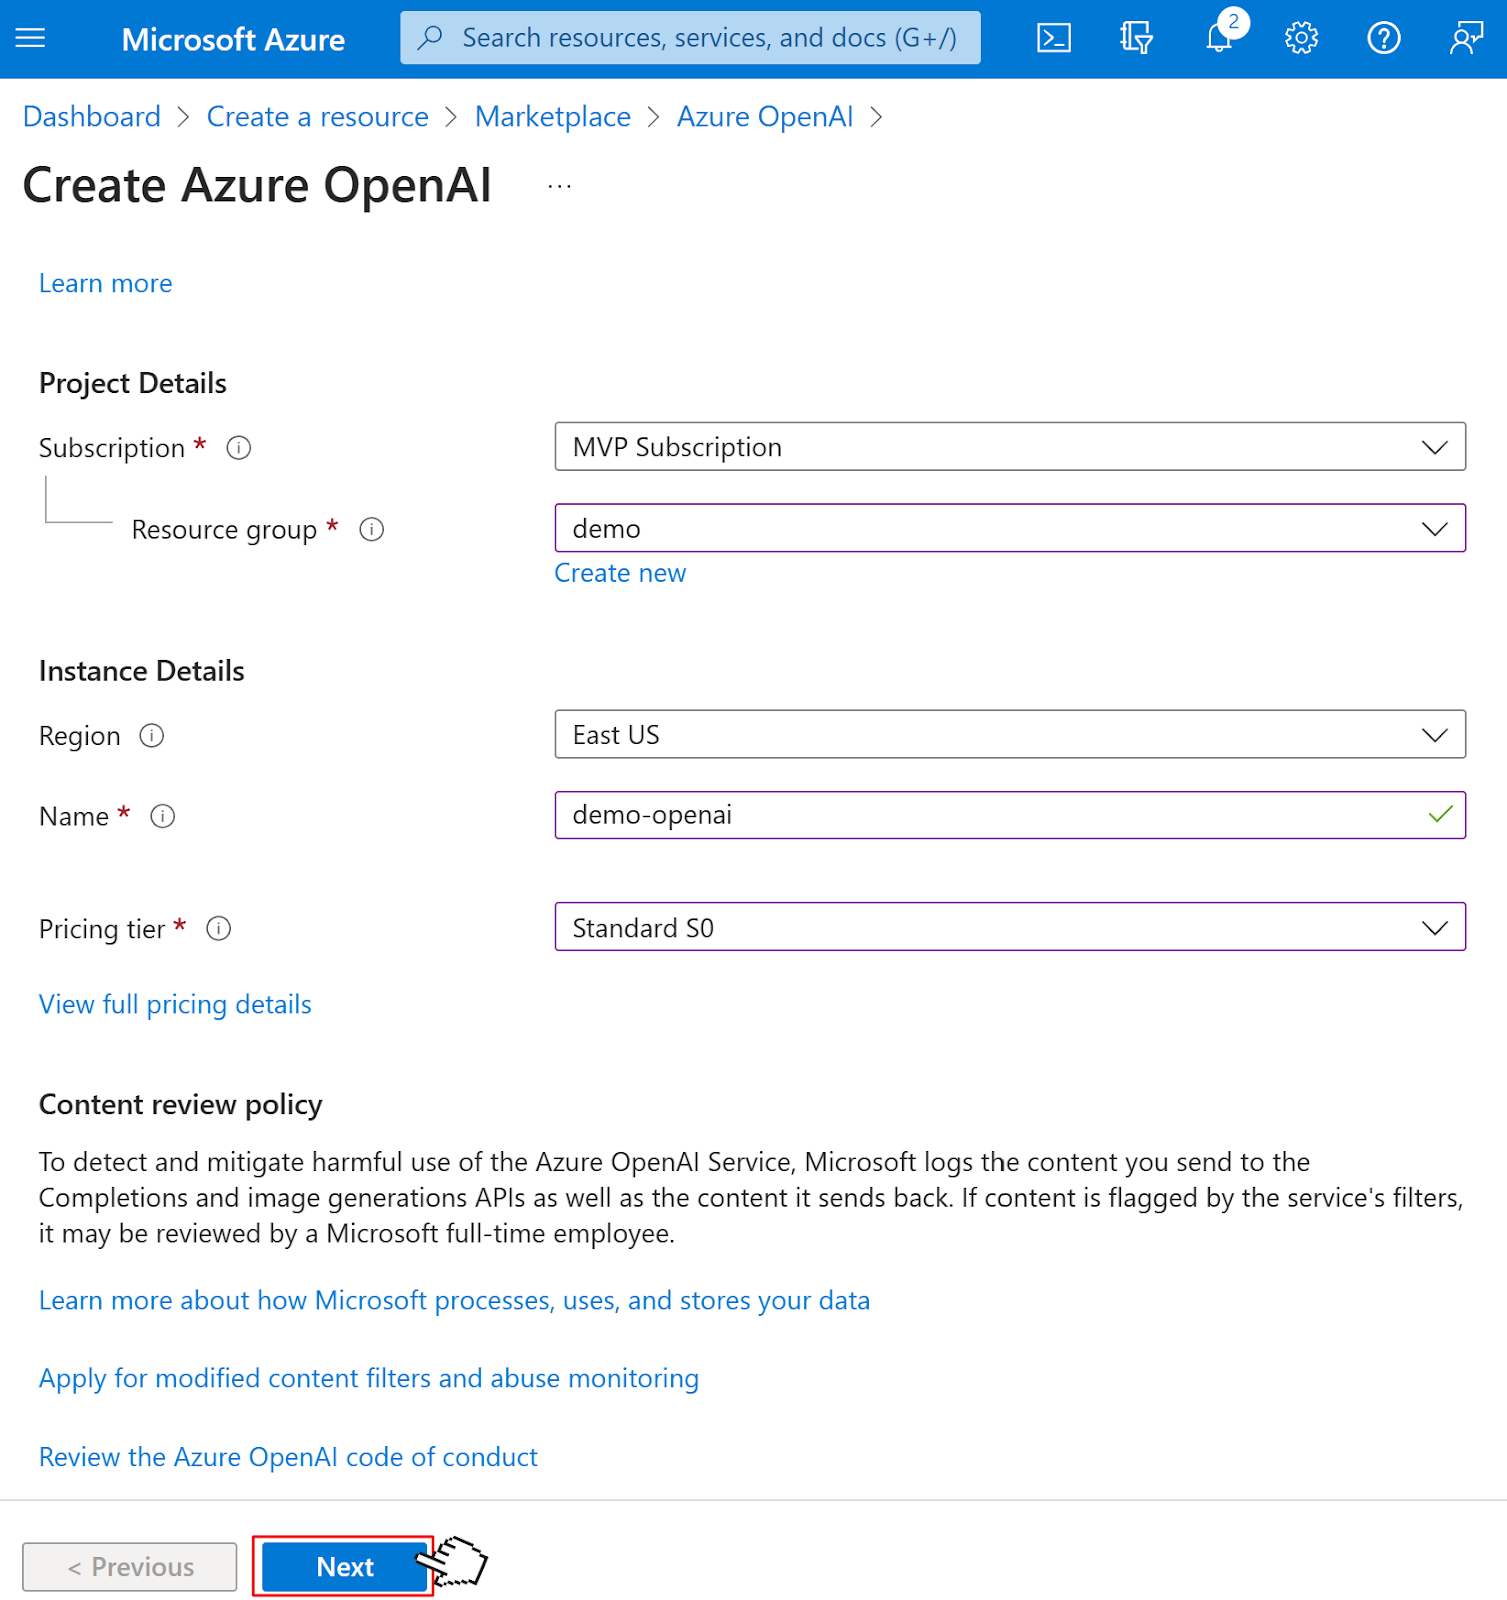 Create Azure OpenAI dialog, asking for the subscription, resource group, region, name, and pricing tier. User filled out the form and is clicking on the Next button.